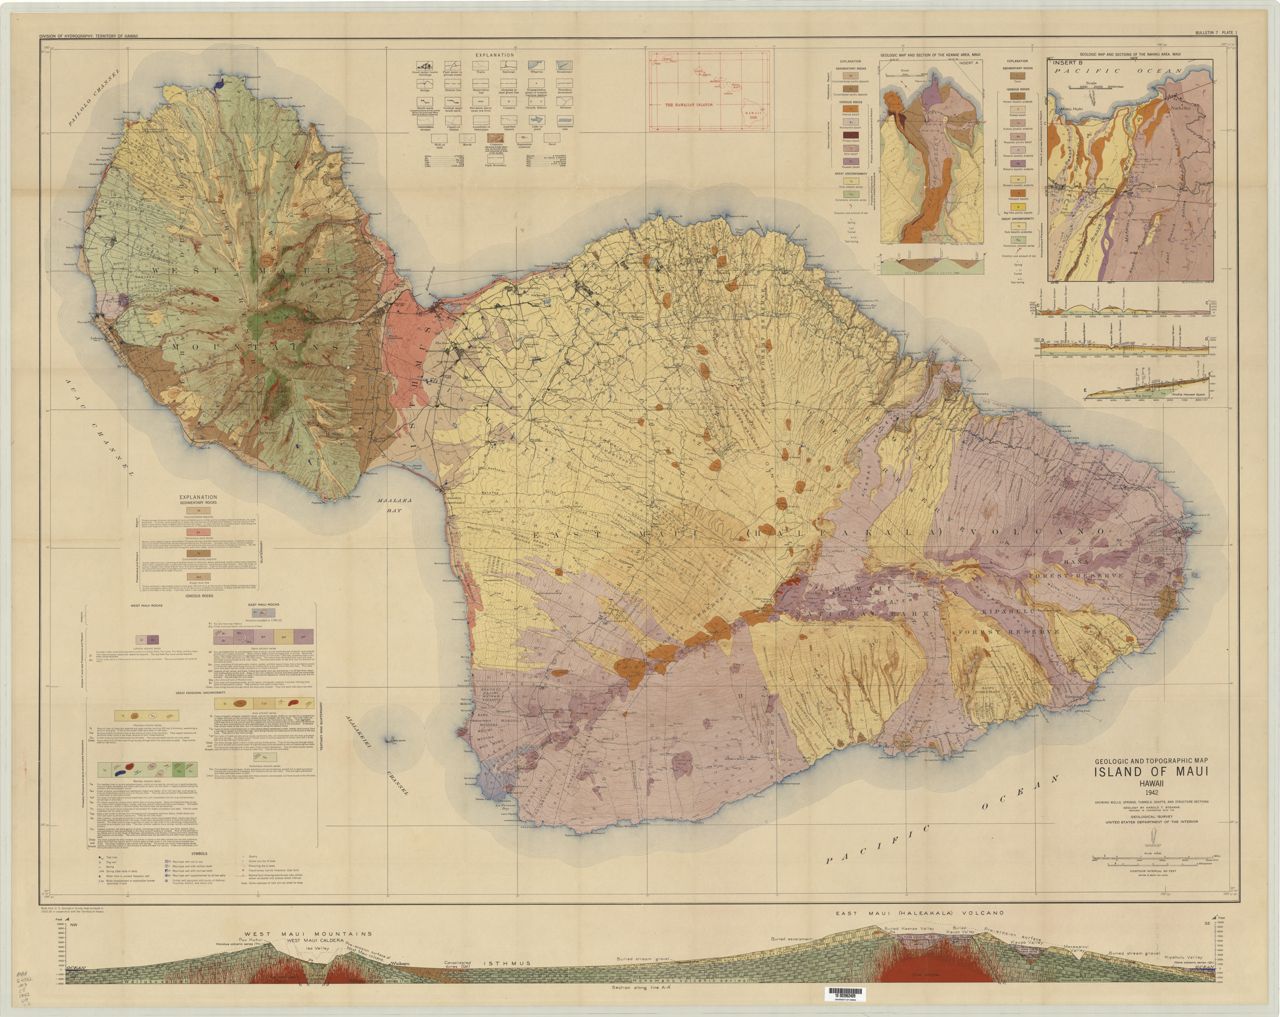 1942 Geologic and Topographic Map of the Island of Maui